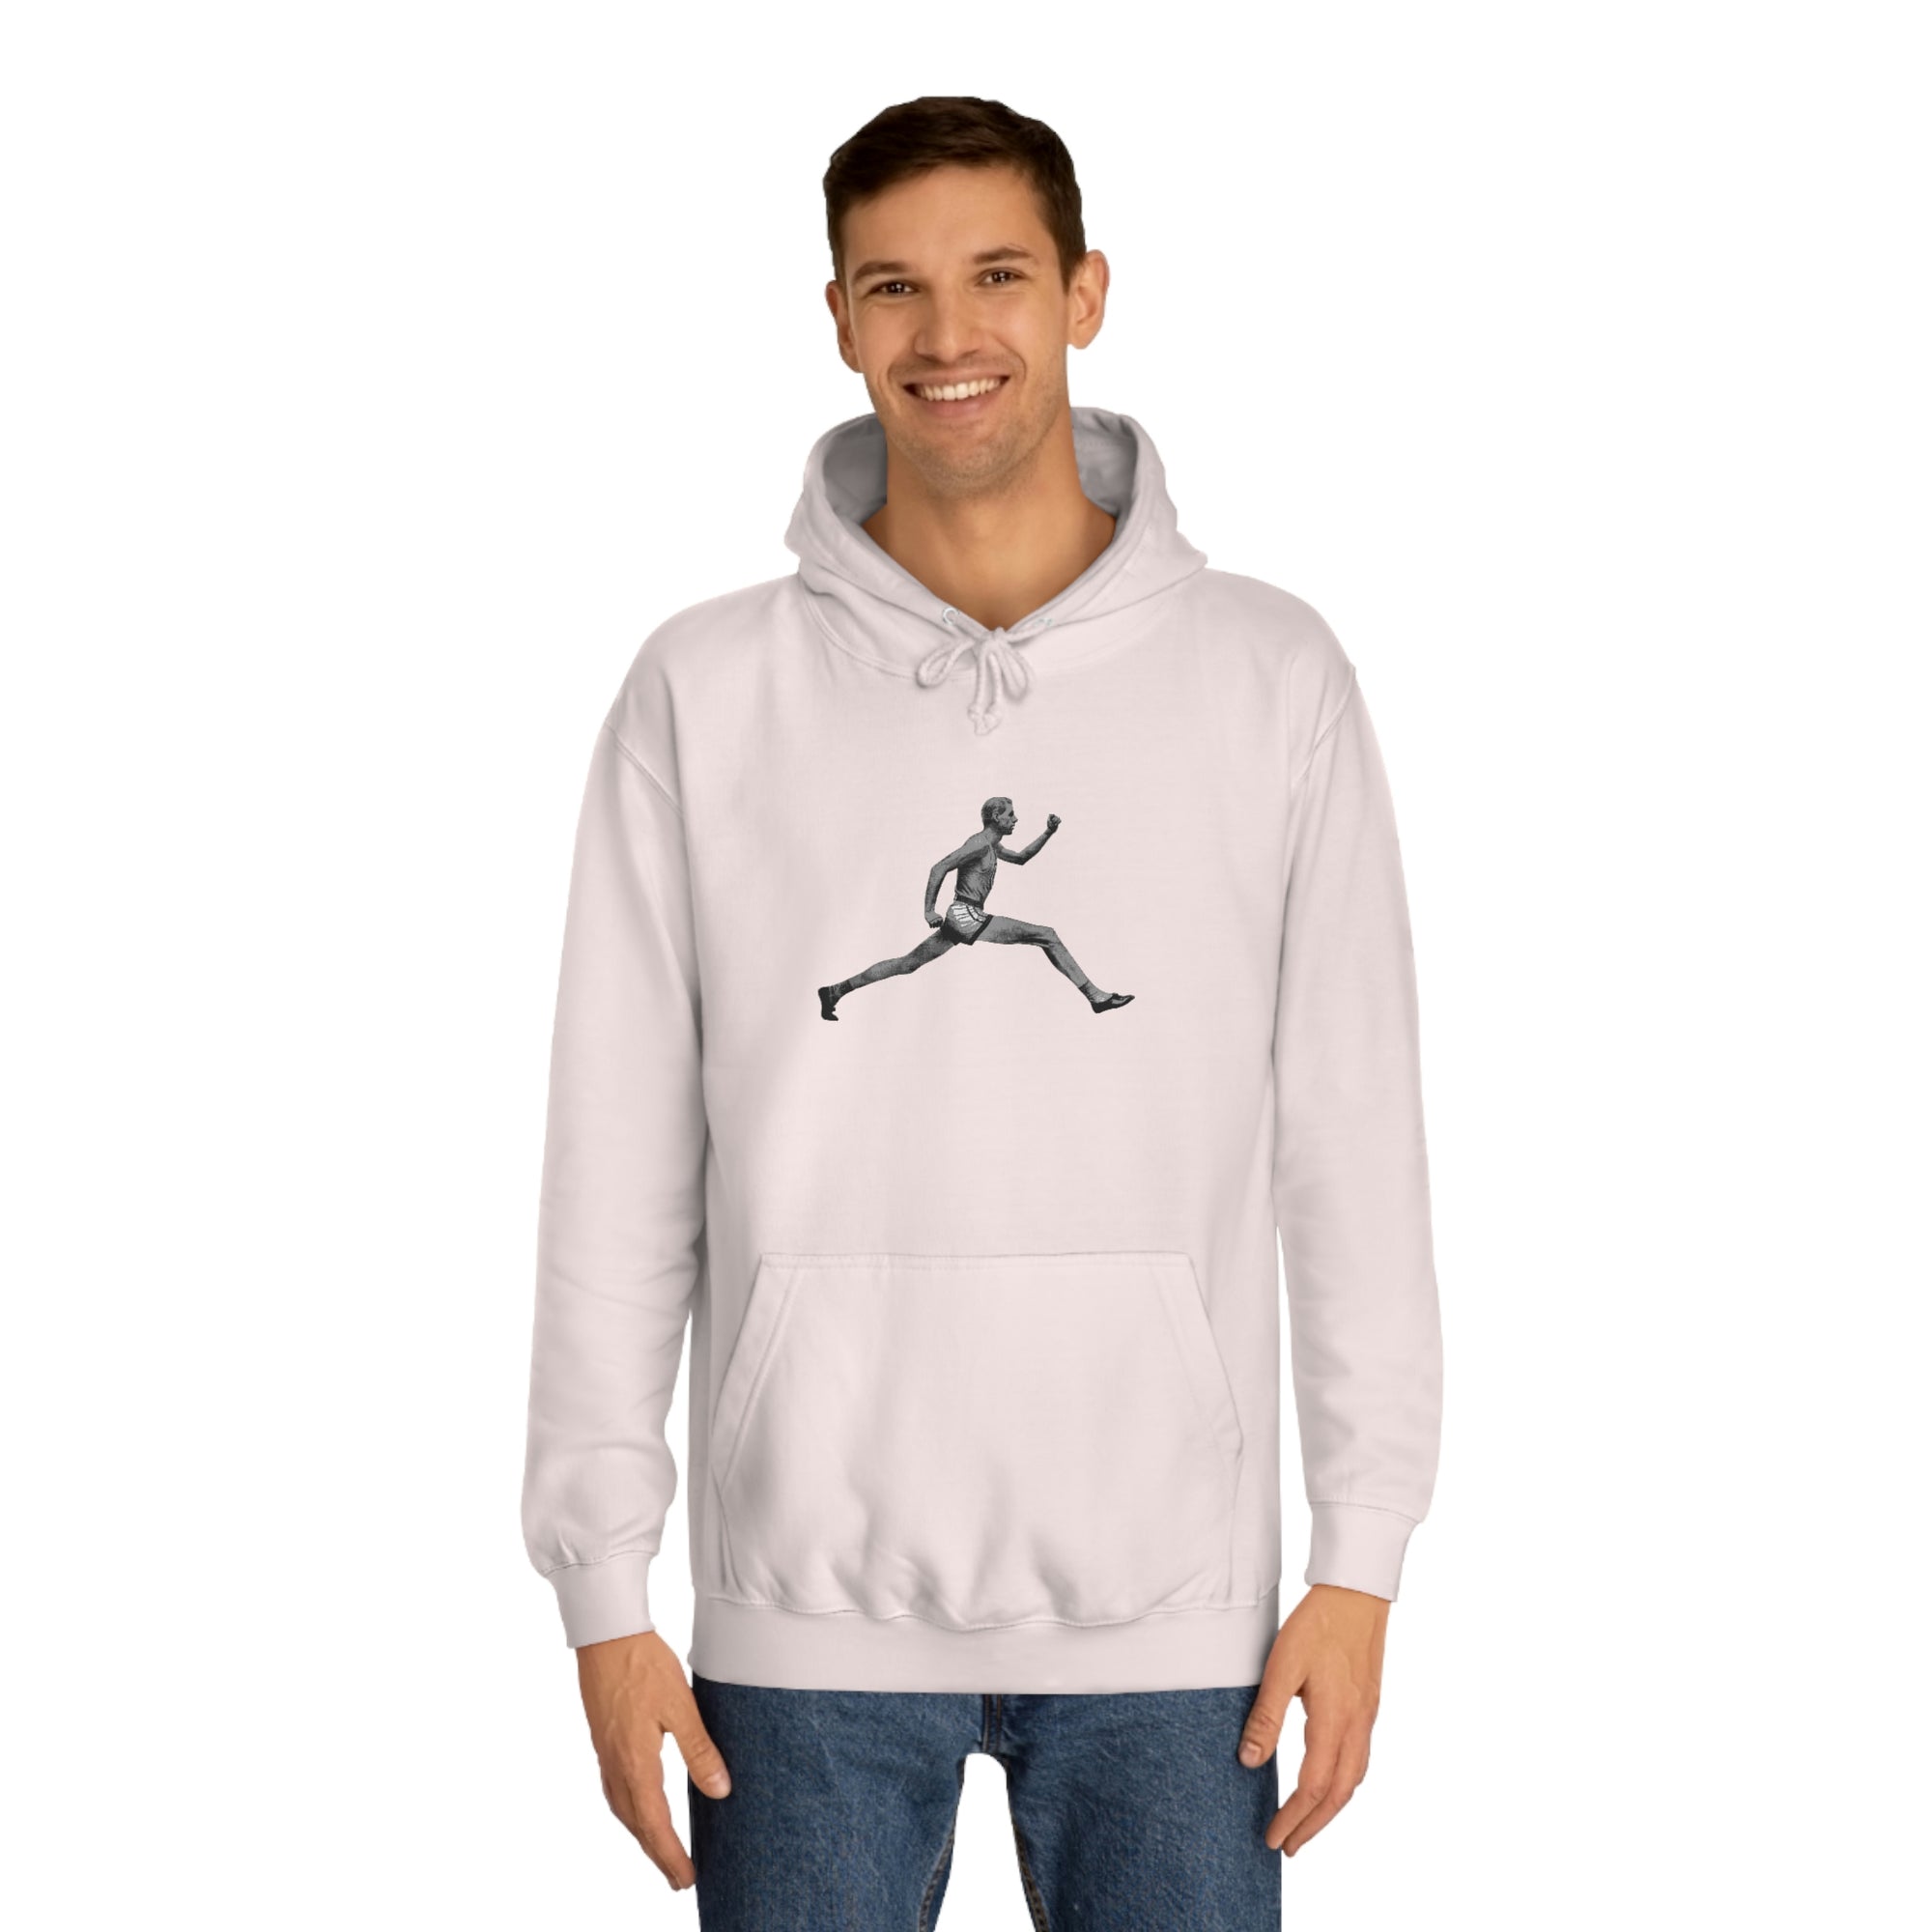 Retro/Vintage runner on a cotton/polyester unisex hoodie